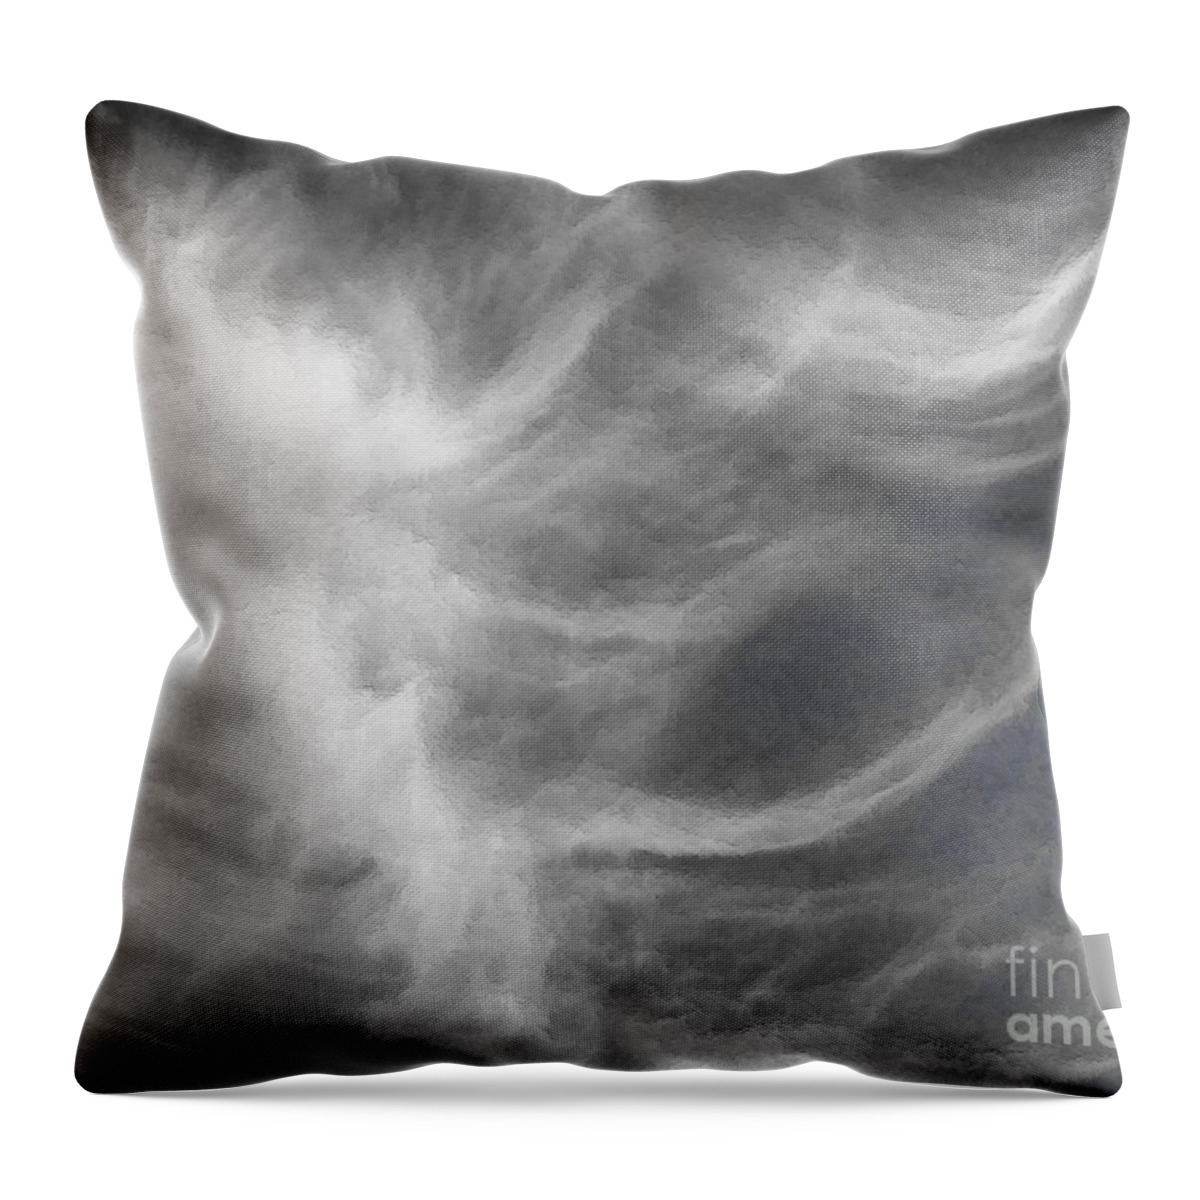 Clouds Throw Pillow featuring the photograph Up In The Clouds #2 by Robyn King